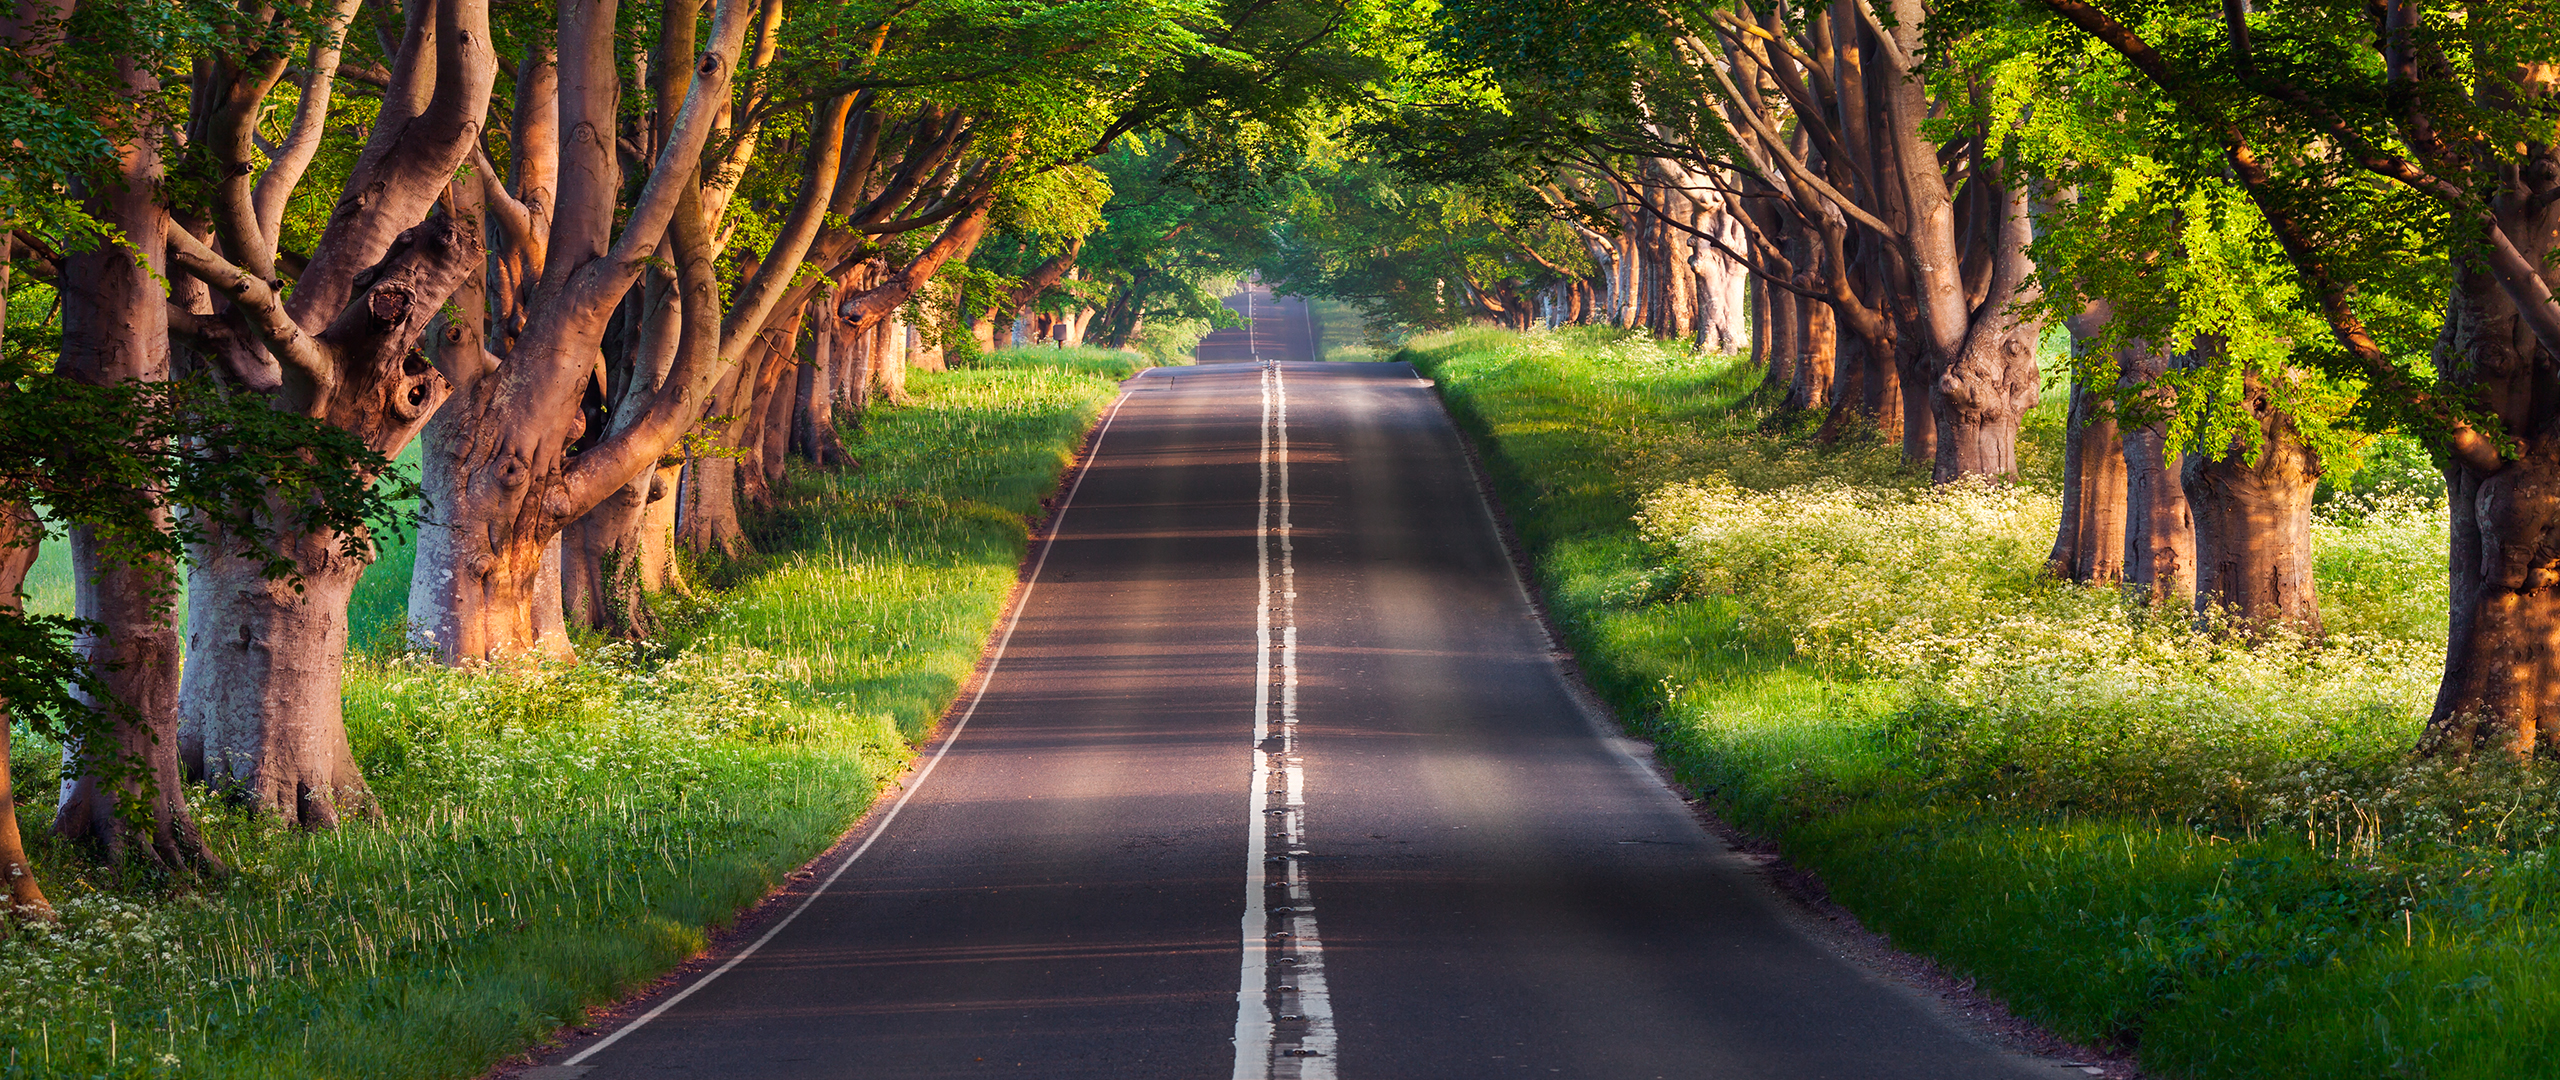 1440p Ultra Wide Wallpaper - Road And Trees Background - HD Wallpaper 